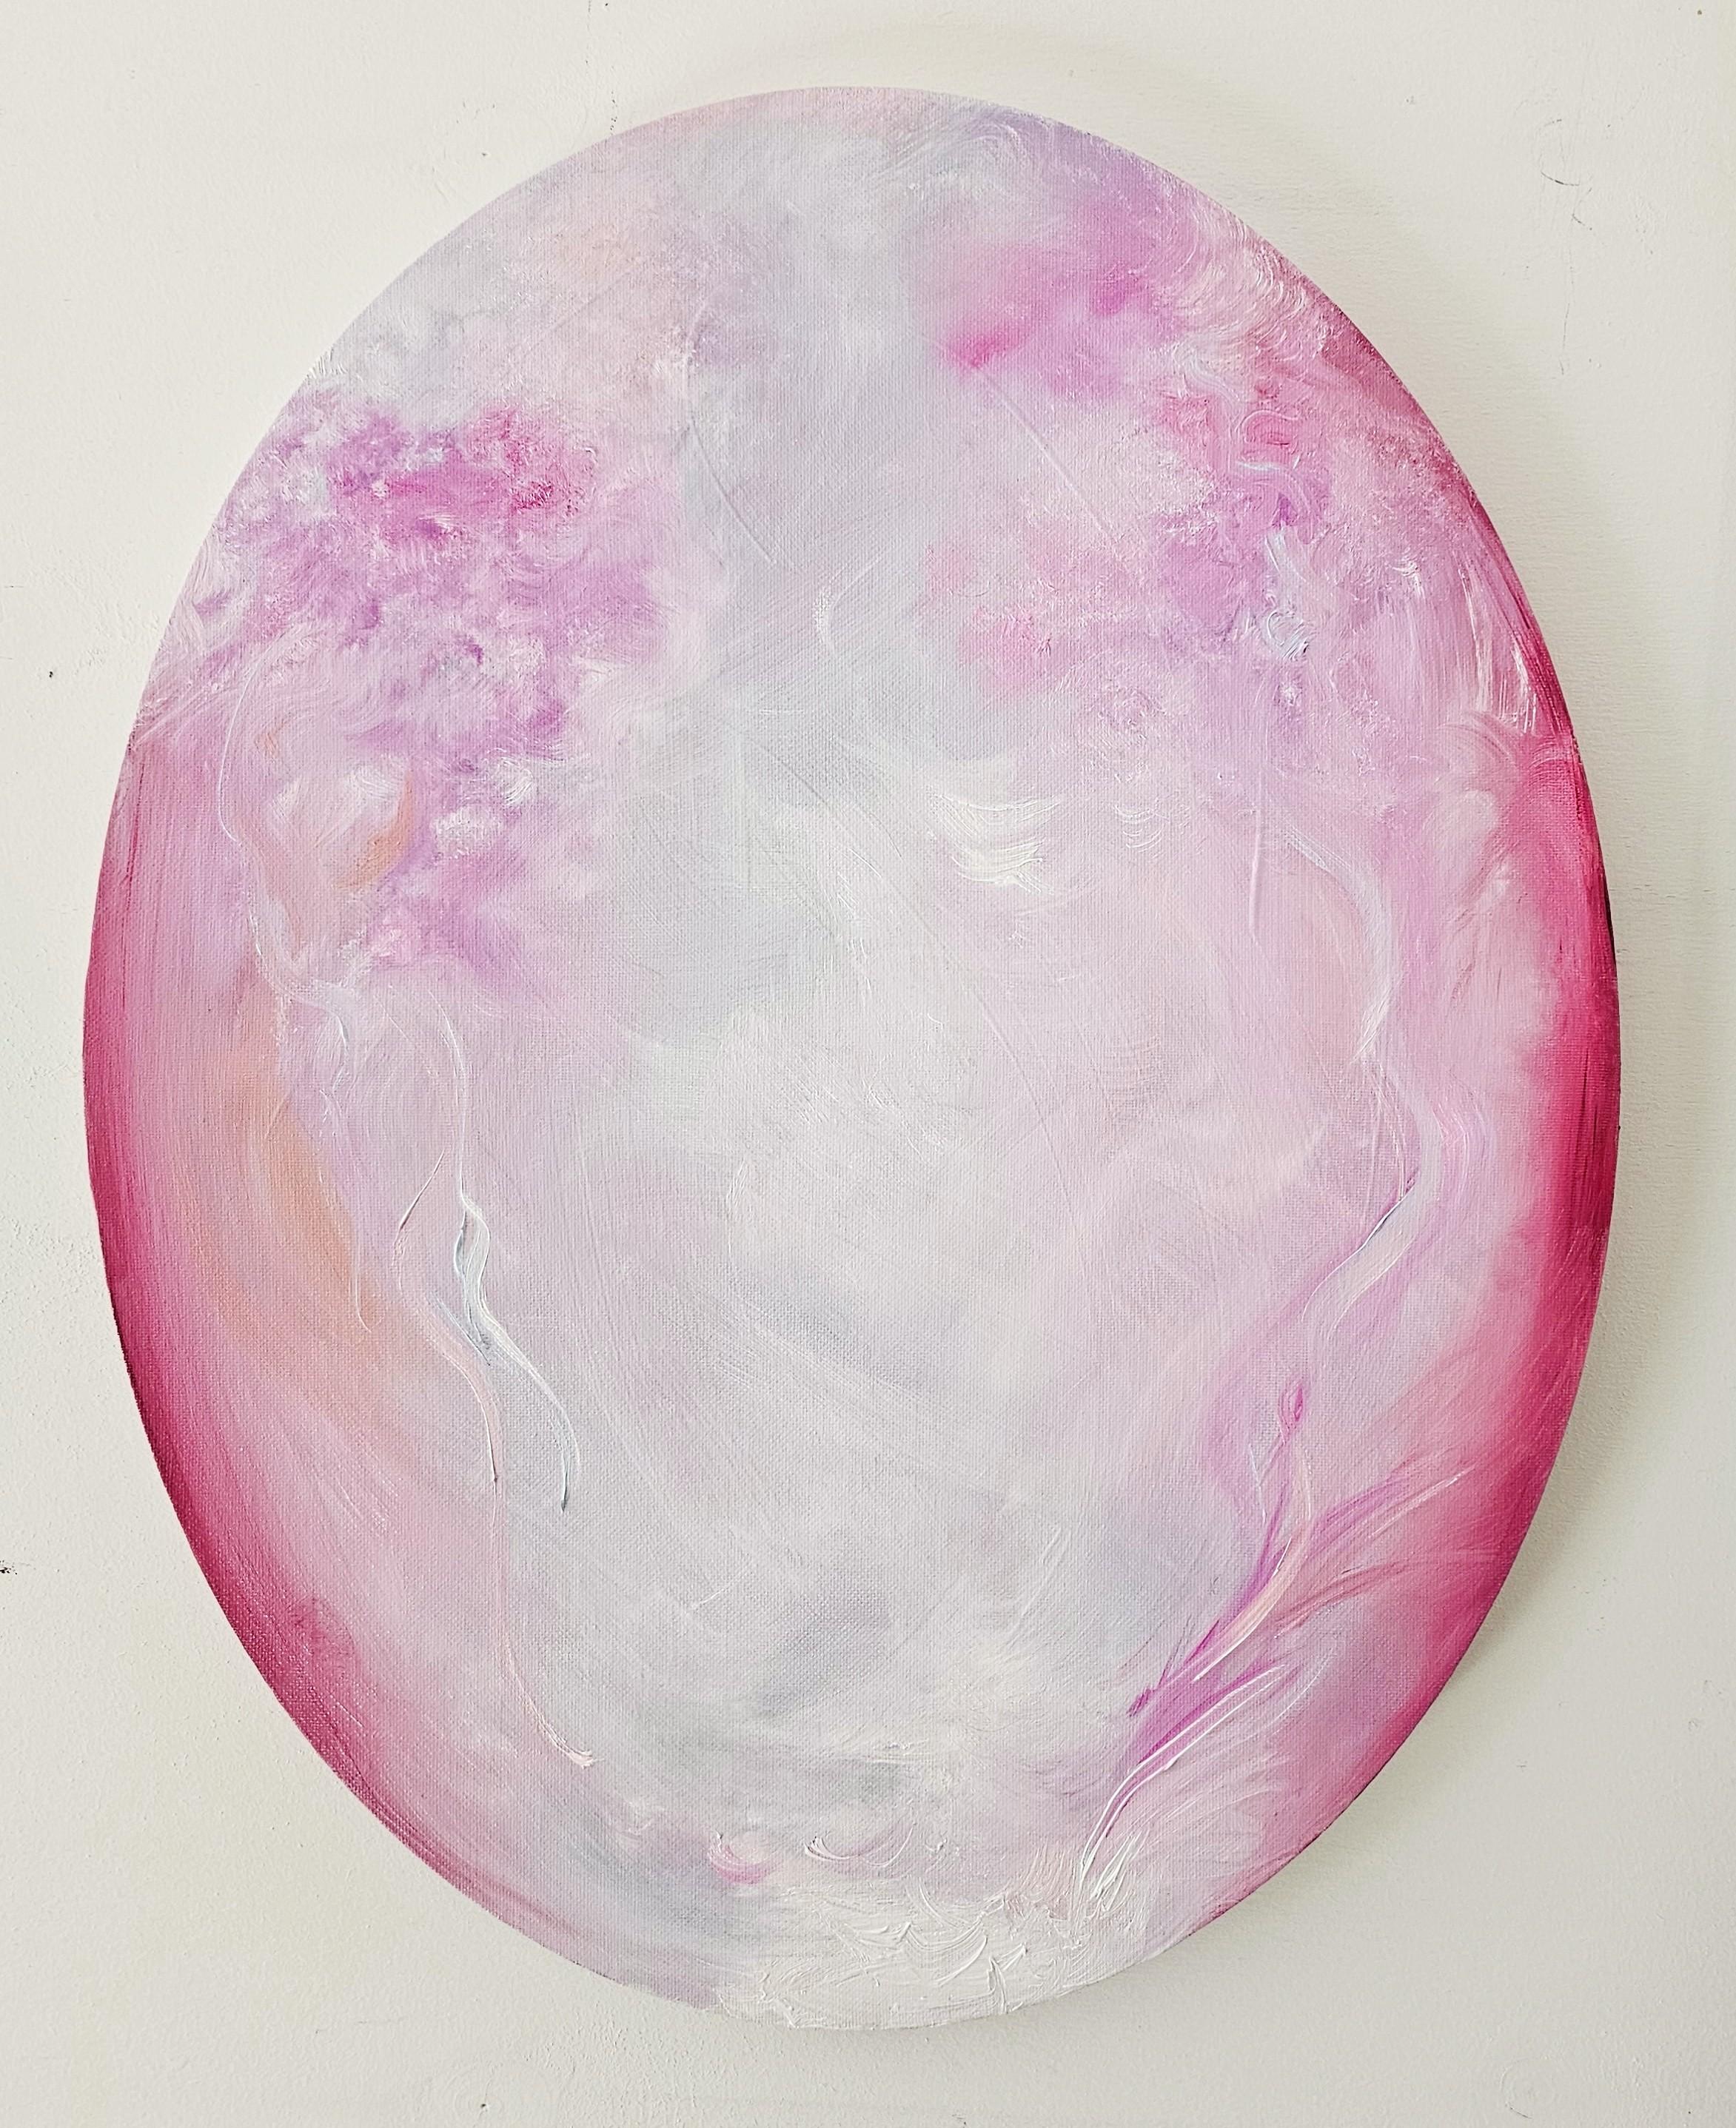 I fell in love - Pink oval abstract painting - Gray Abstract Painting by Jennifer L. Baker